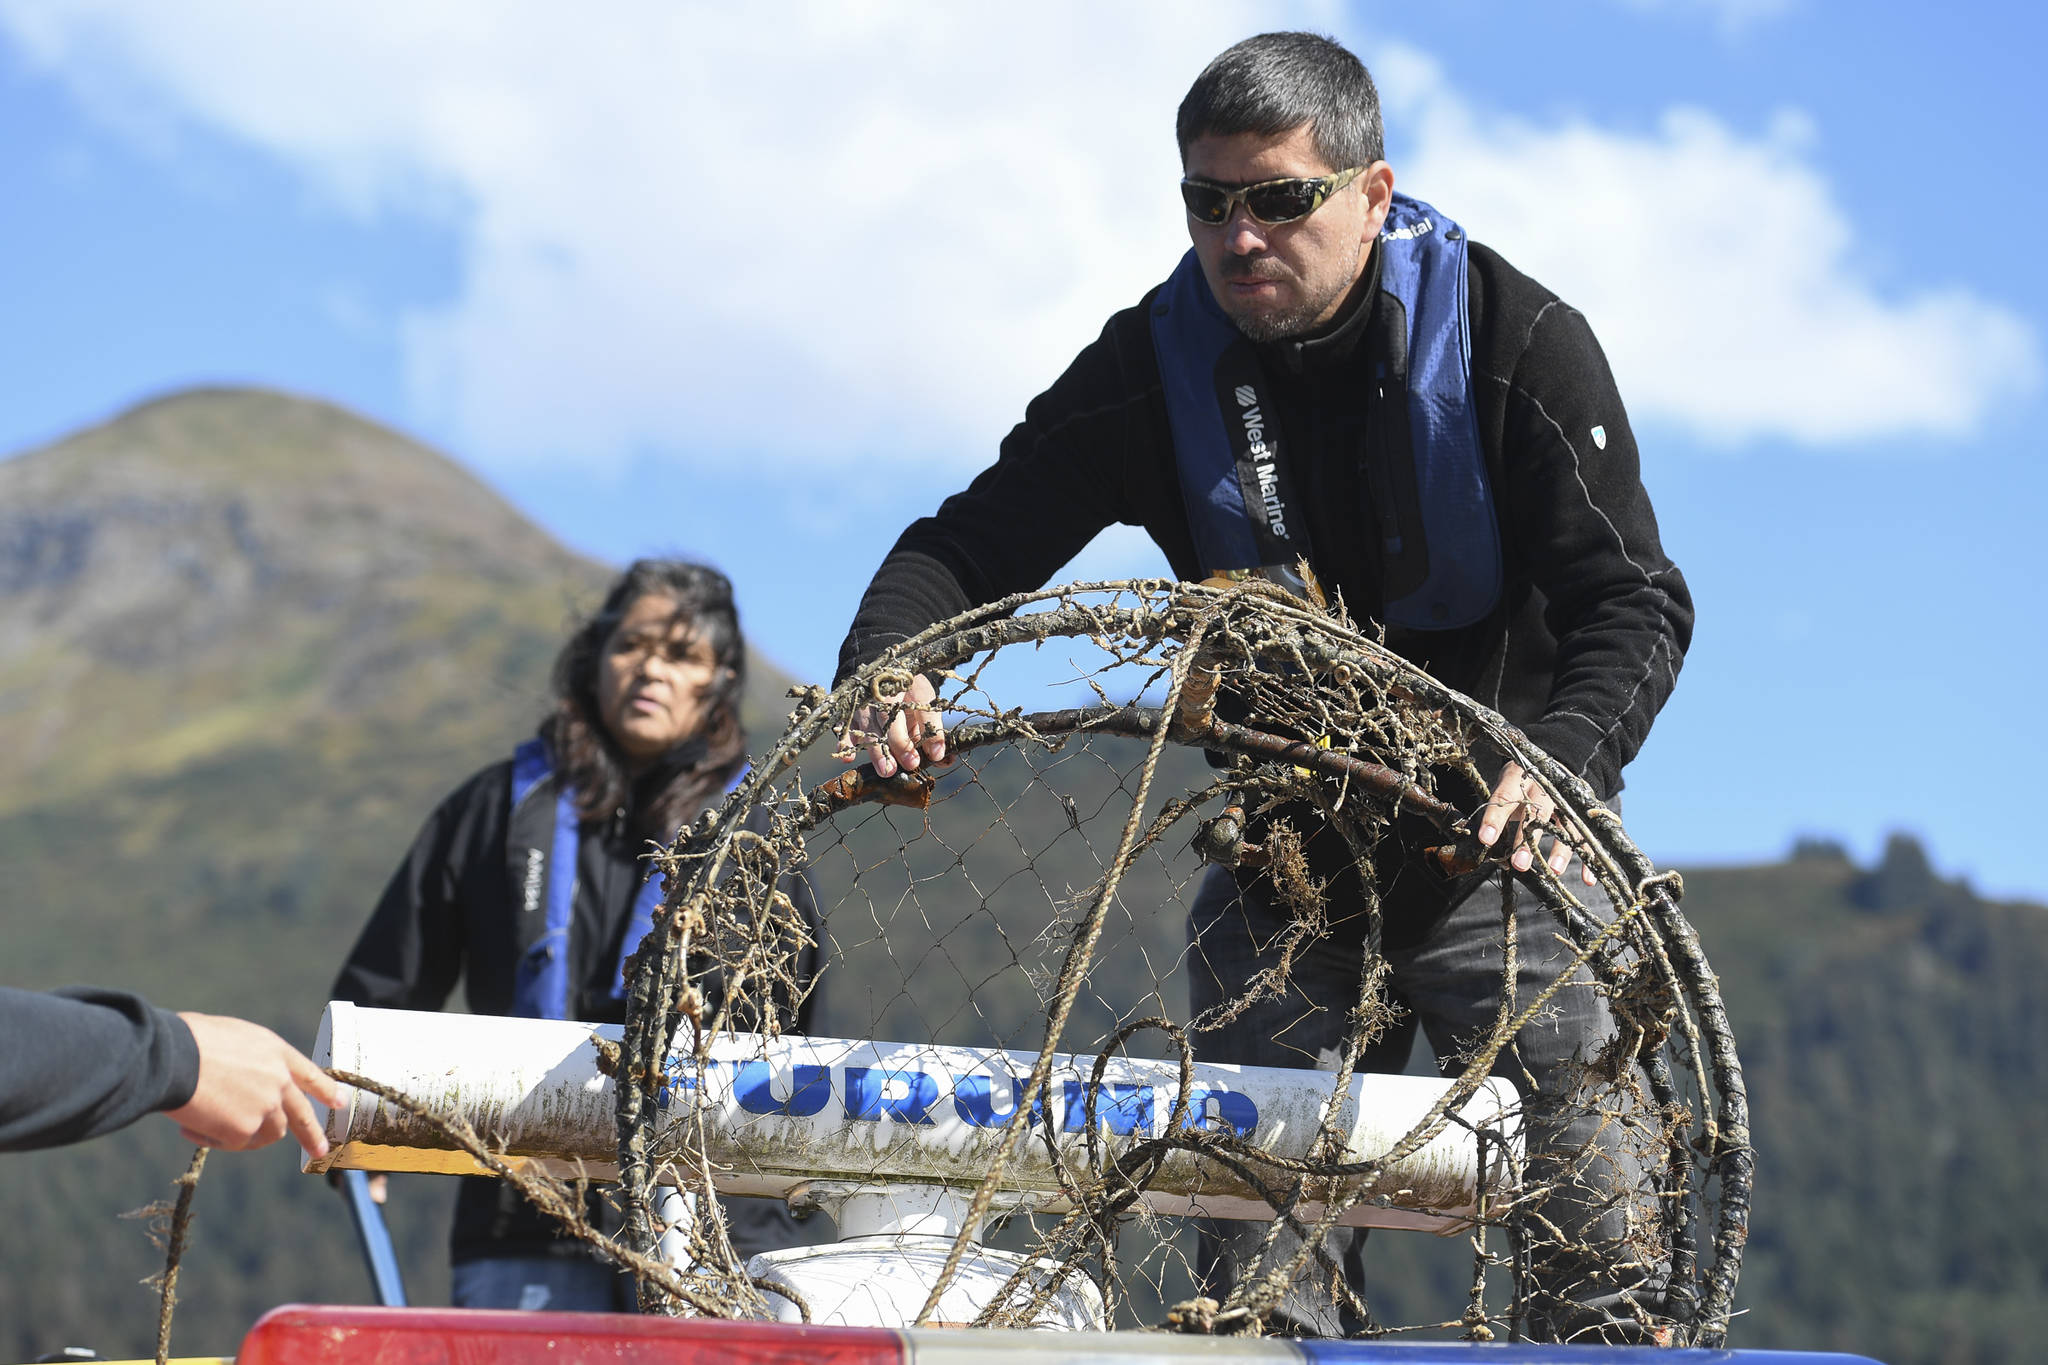 Kamal Lindoff, right, and Bernadine DeAsis store an old crab pot as members of the Army’s 74th Engineer Dive Detachment work off a Juneau Harbormaster boat to retrieve lost crab pots in Gastineau Channel for the Douglas Indian Association/NOAA Marine Debris Project on Thursday, Sept. 5, 2019. The project aims to identify and remove derelict crab pots and their continued negative impact on wildlife and the environment. (Michael Penn | Juneau Empire)